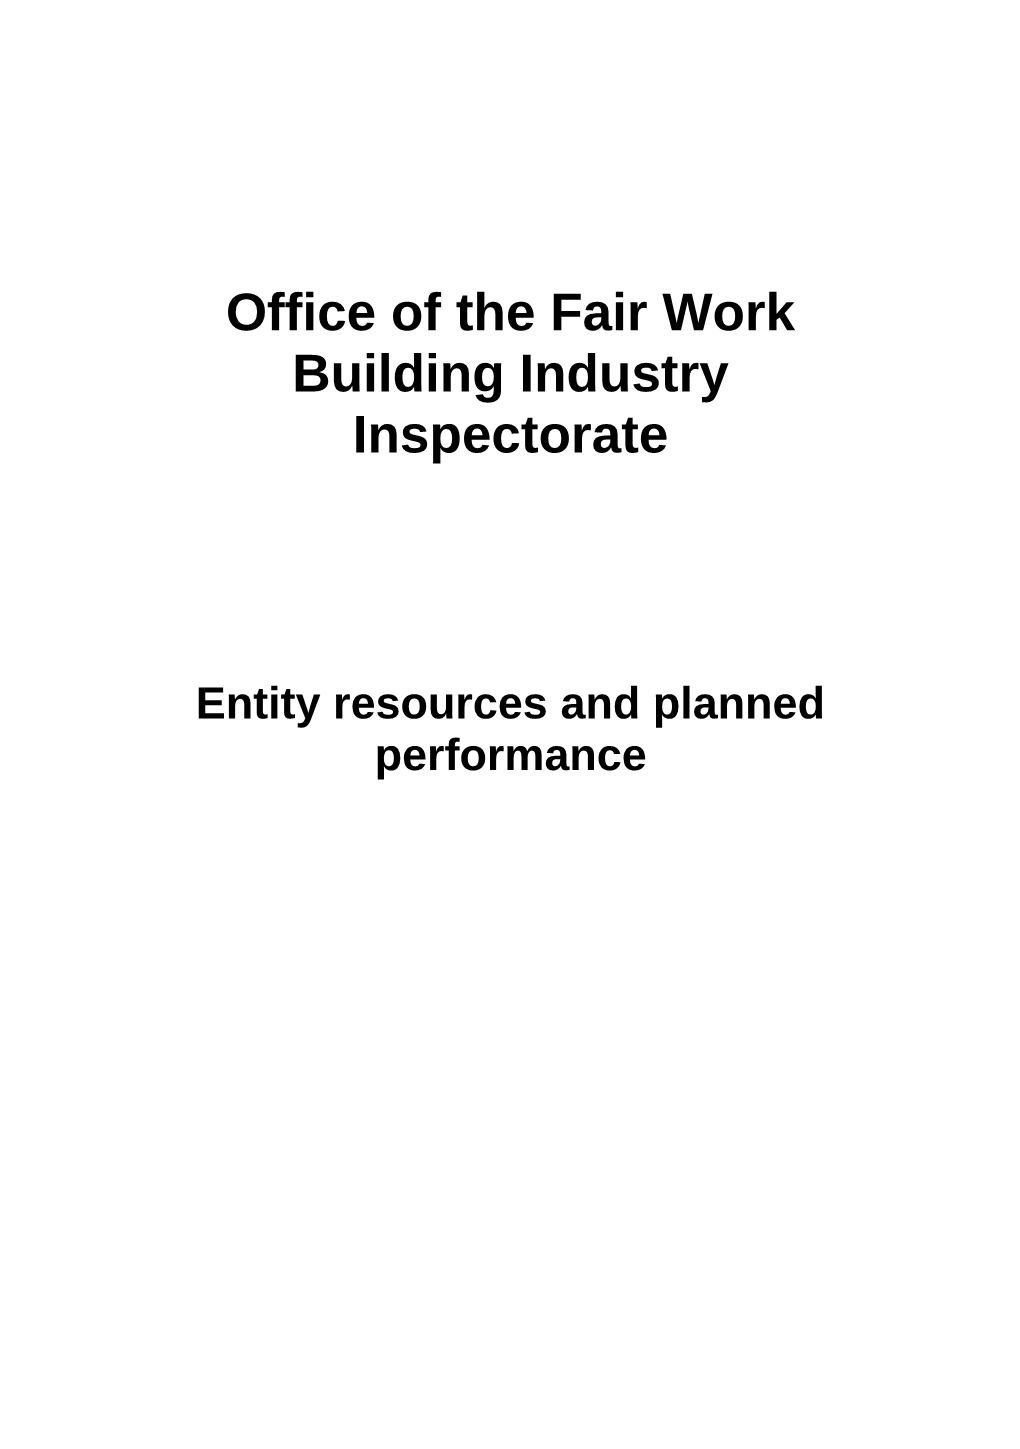 Office of the Fair Work Building Industry Inspectorate